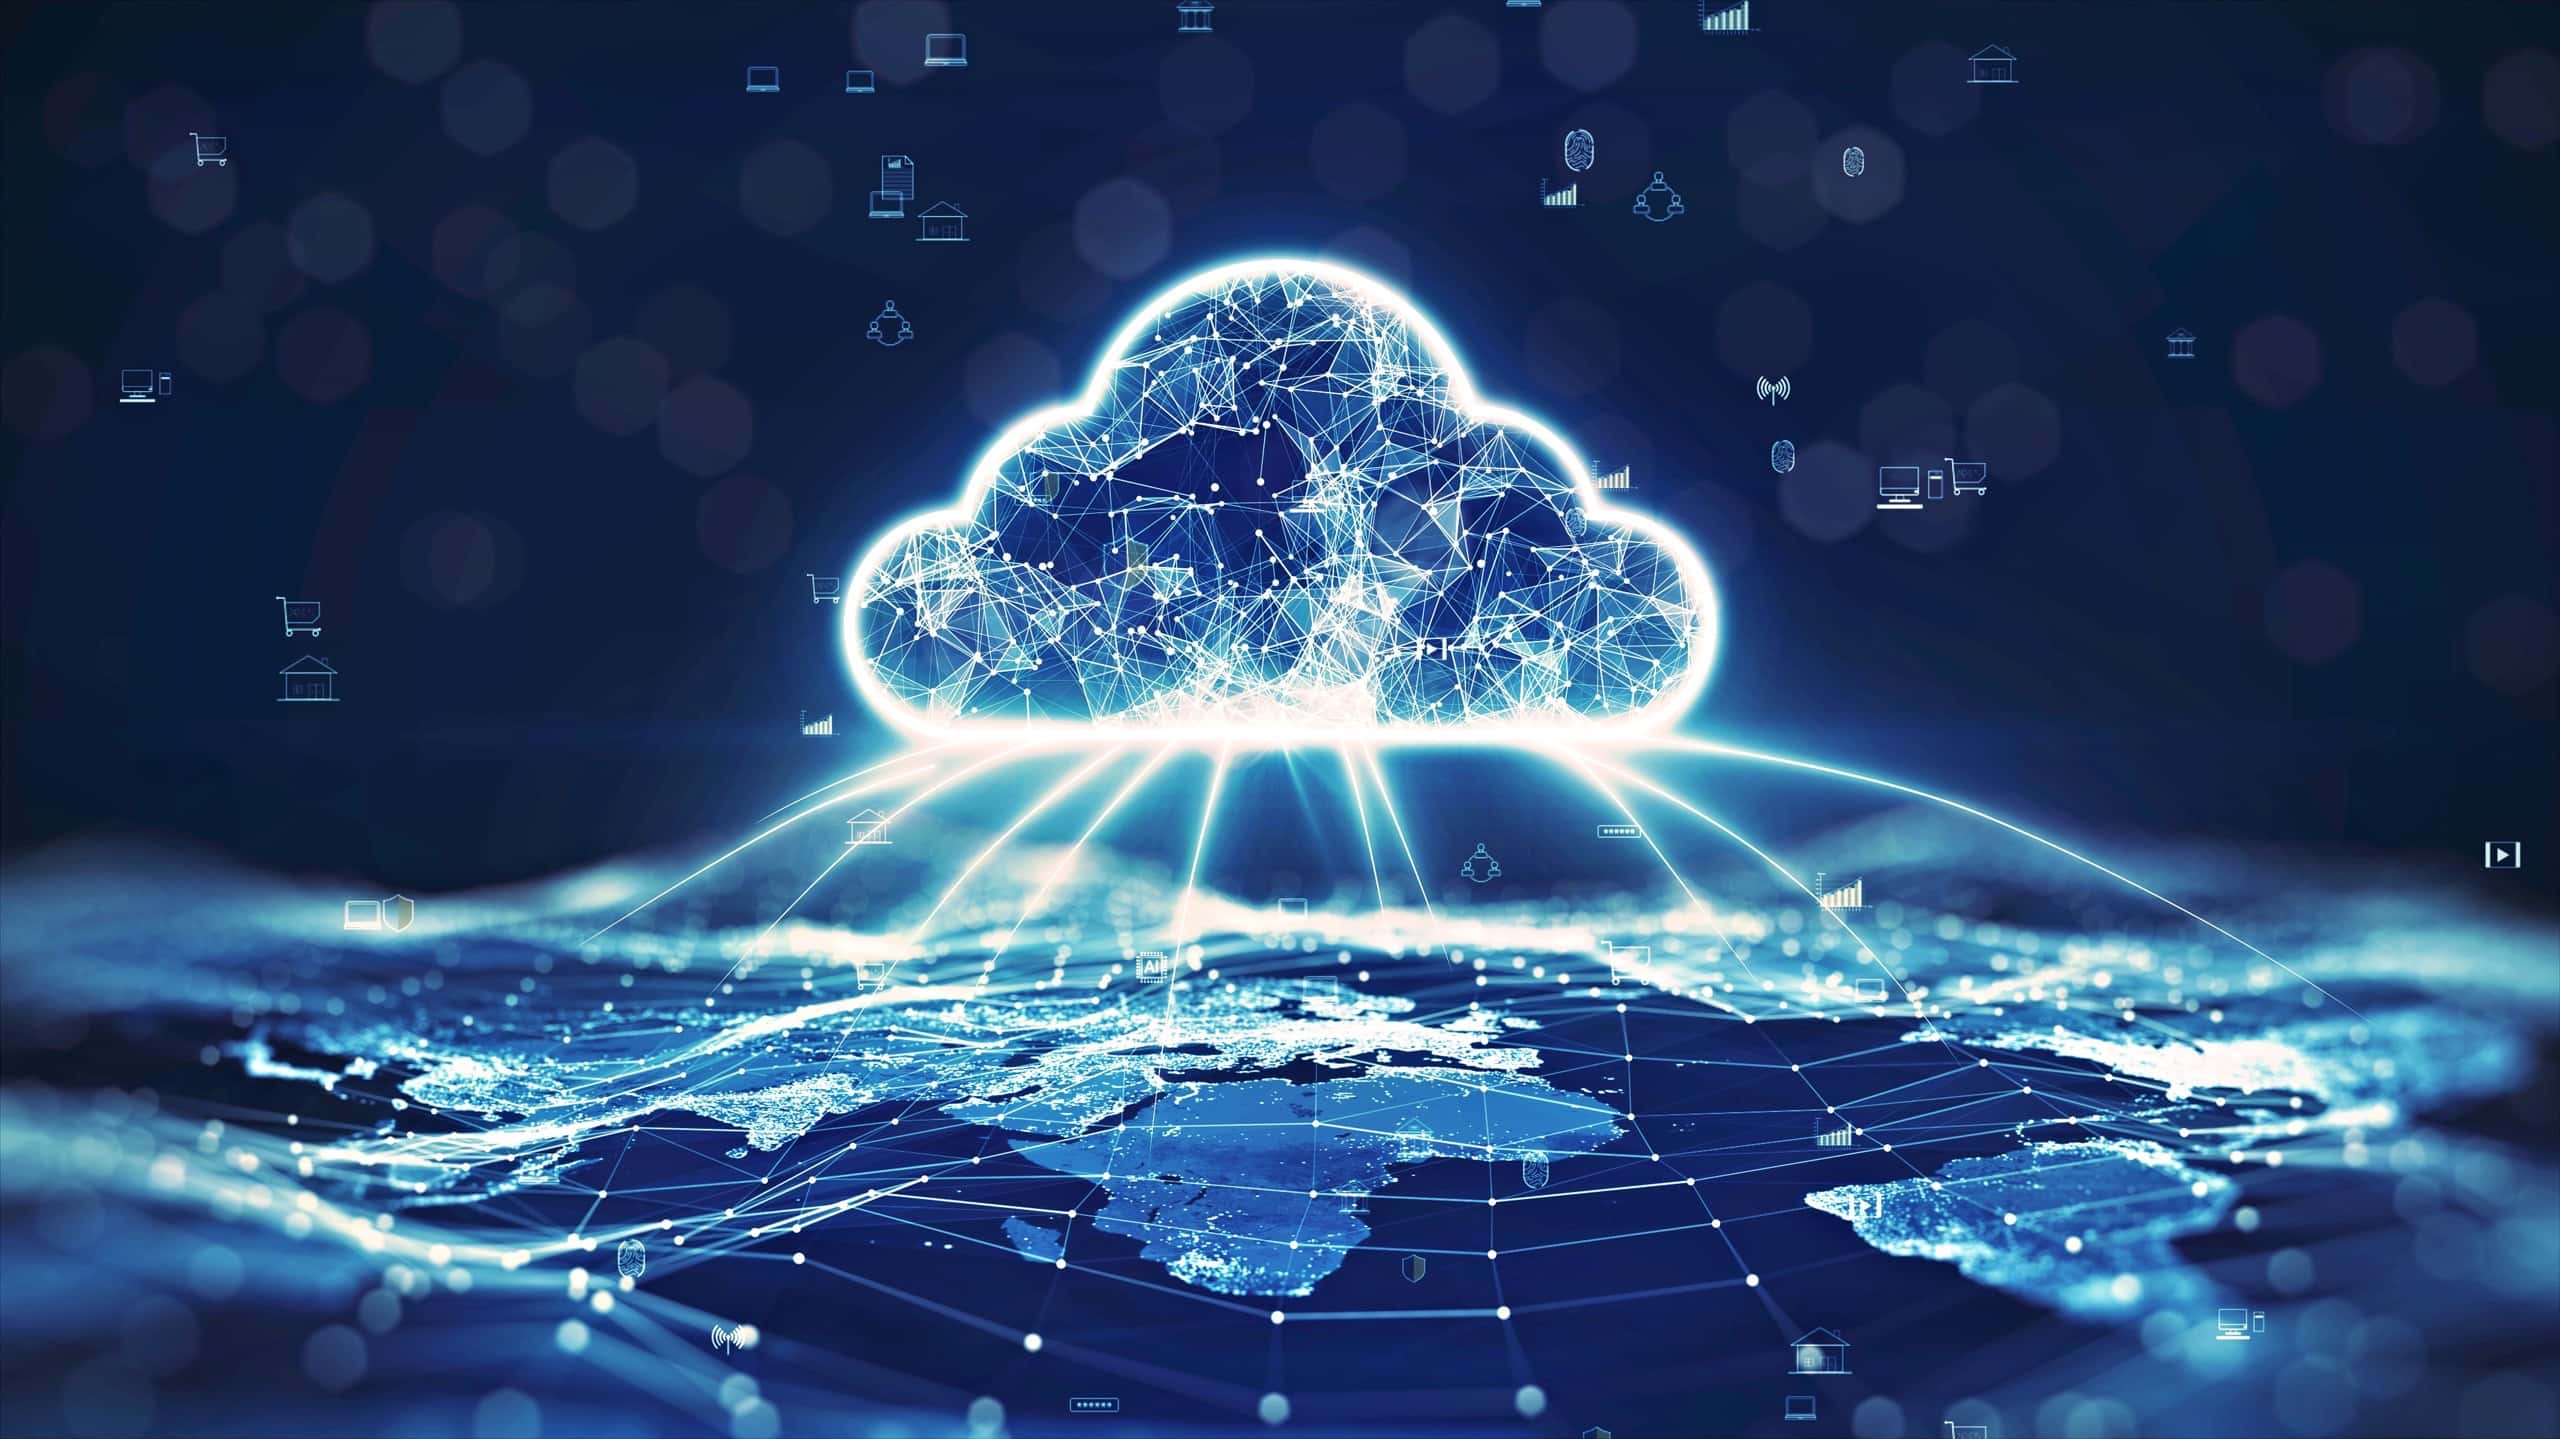 A digital cloud hovering over a map of the world with interconnected icons, representing the comprehensive cloud services offered by Fast Fixx, including strategy, migration, management, and optimization